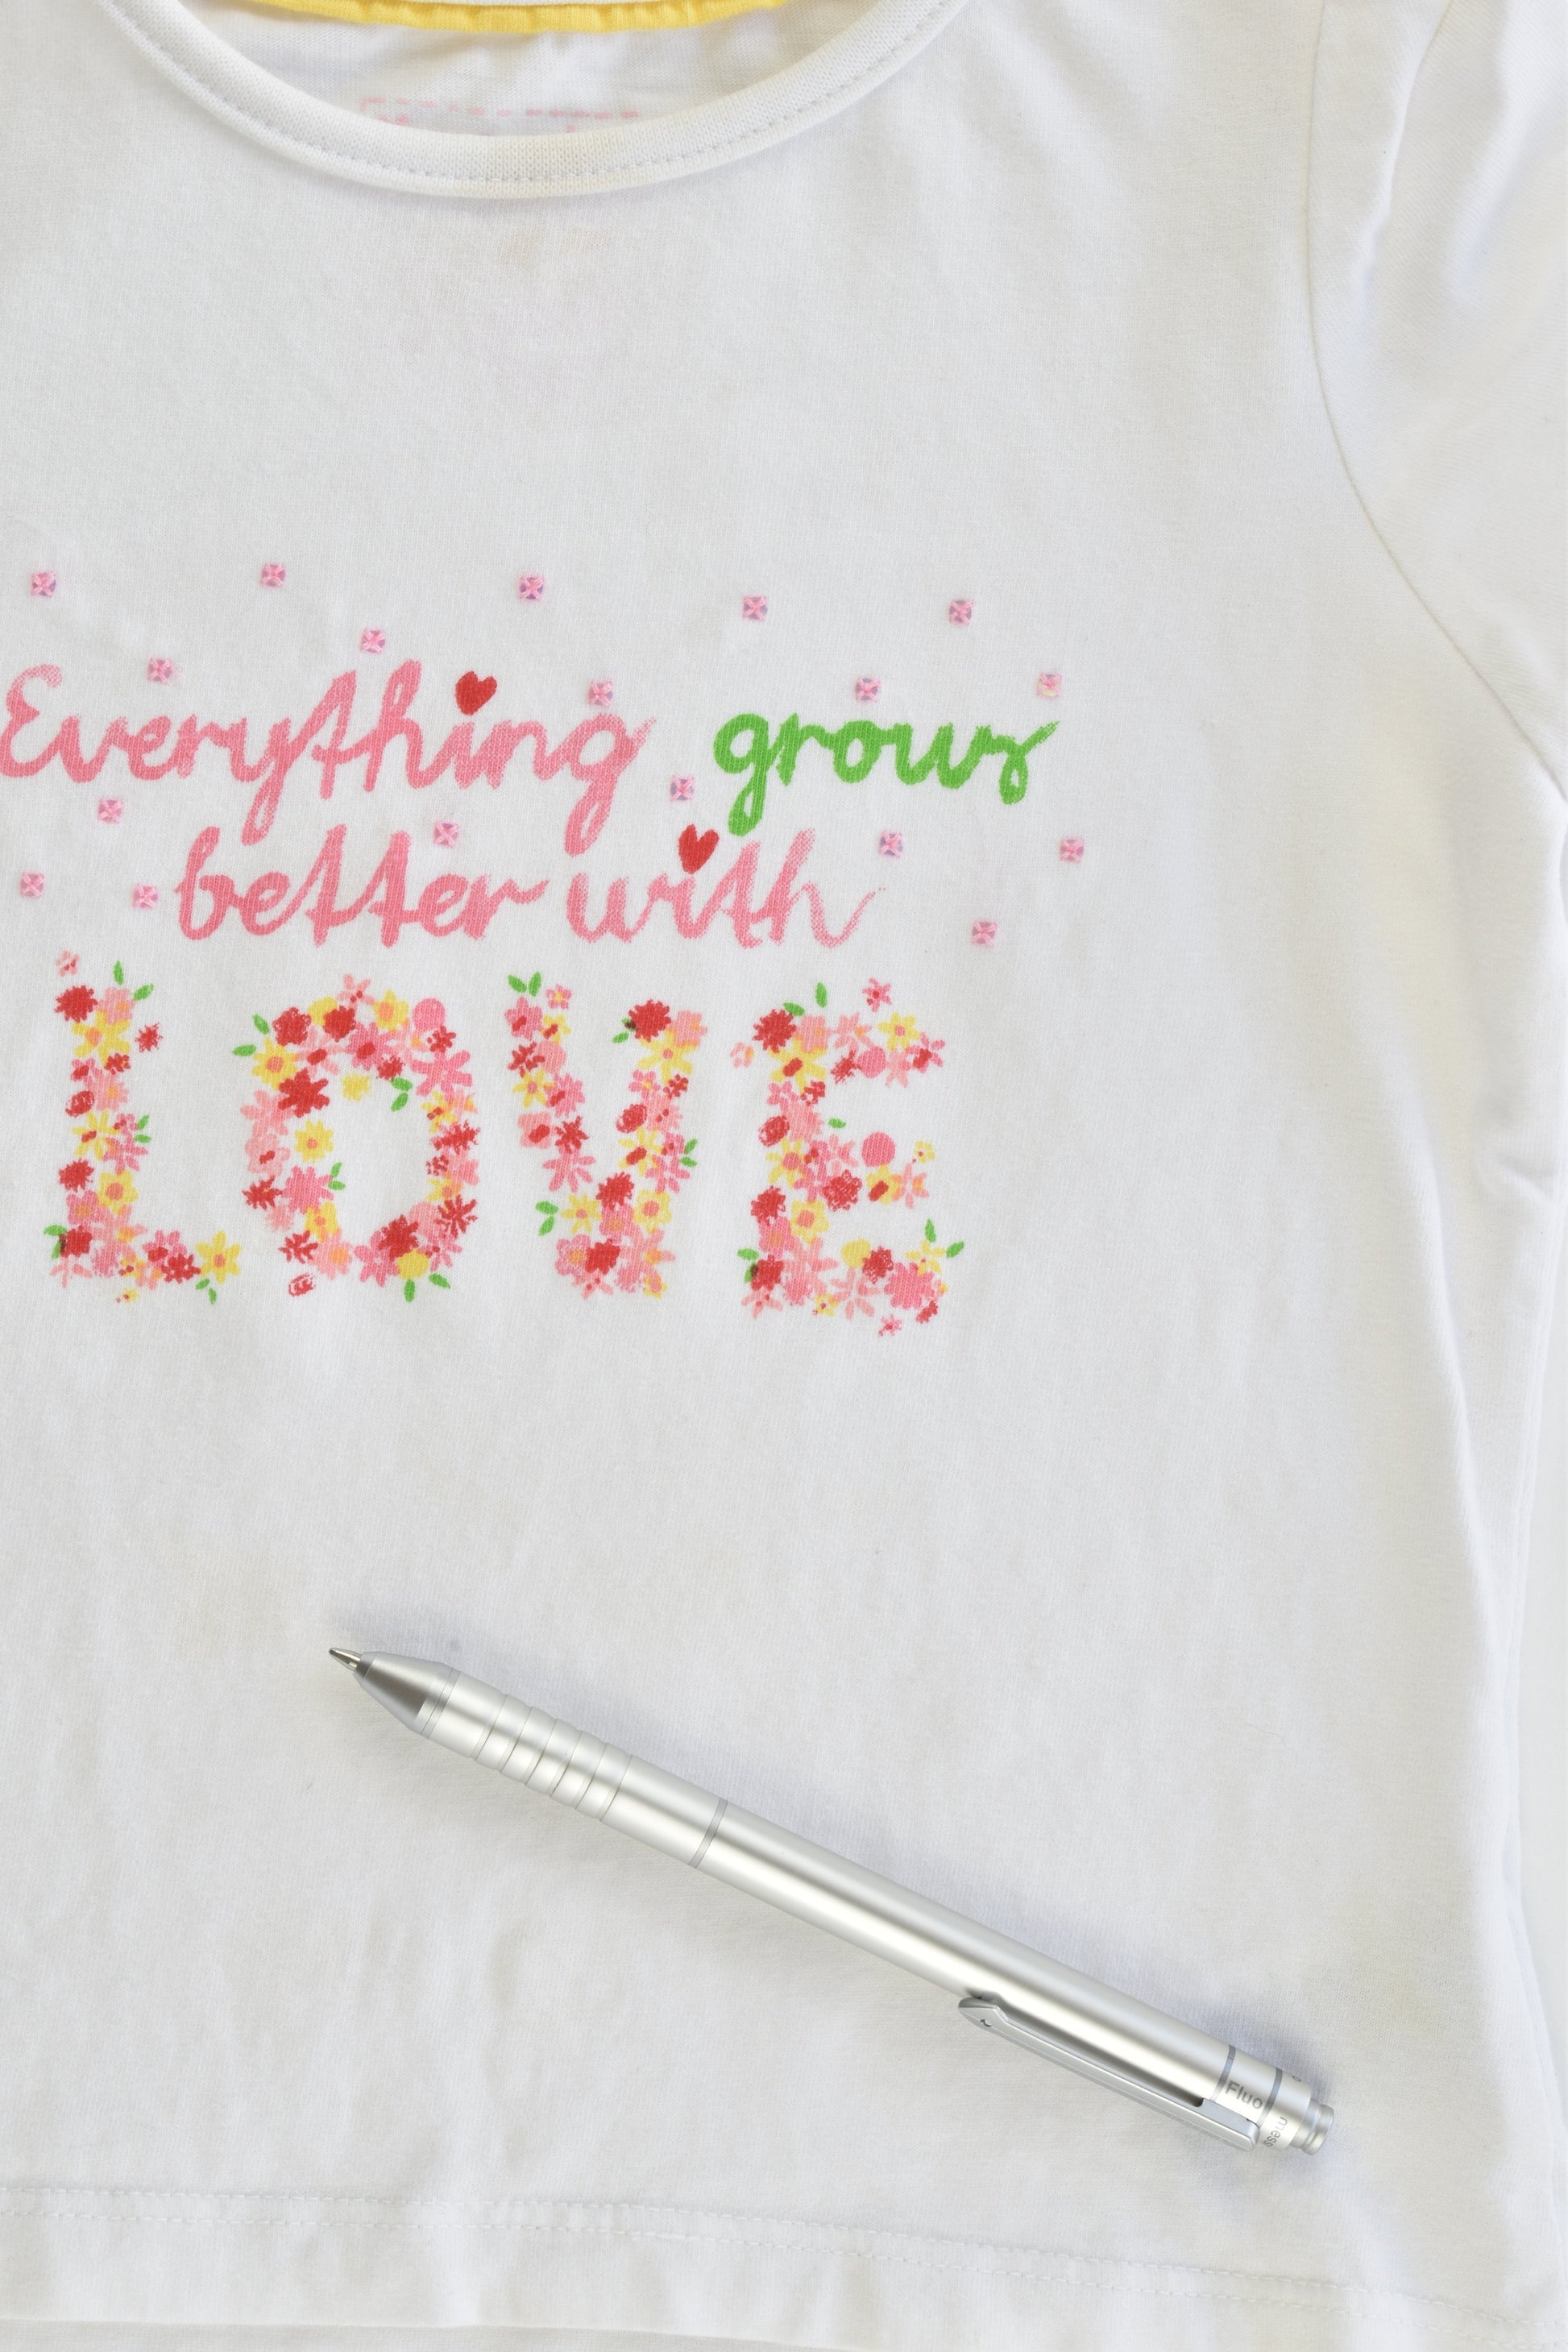 Mothercare Size 12-18 months "Everything Grows Better with Love" T-shirt